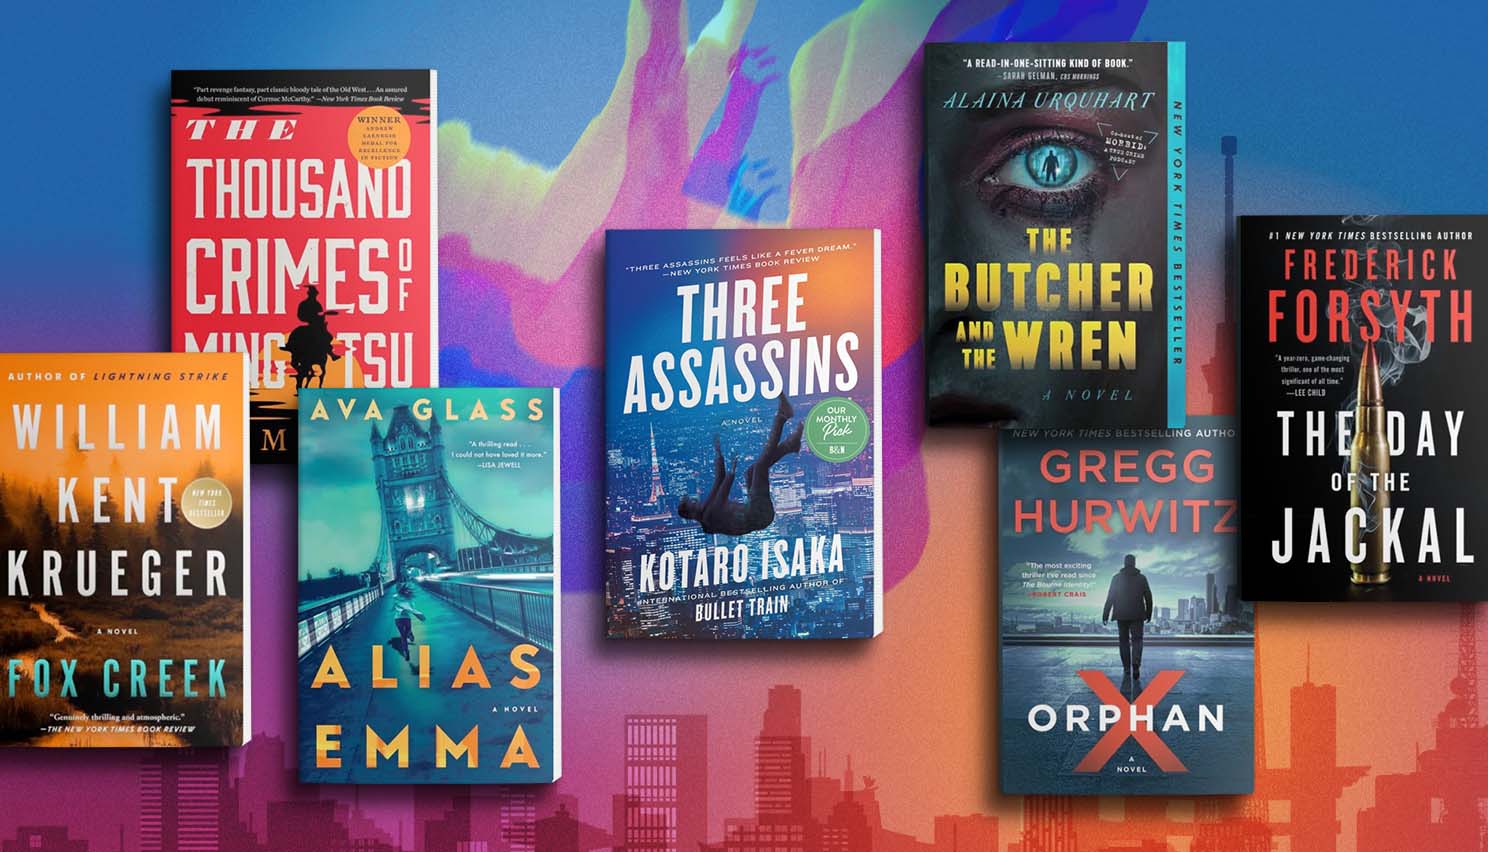 The Best Chase Stories - Five Books Expert Recommendations